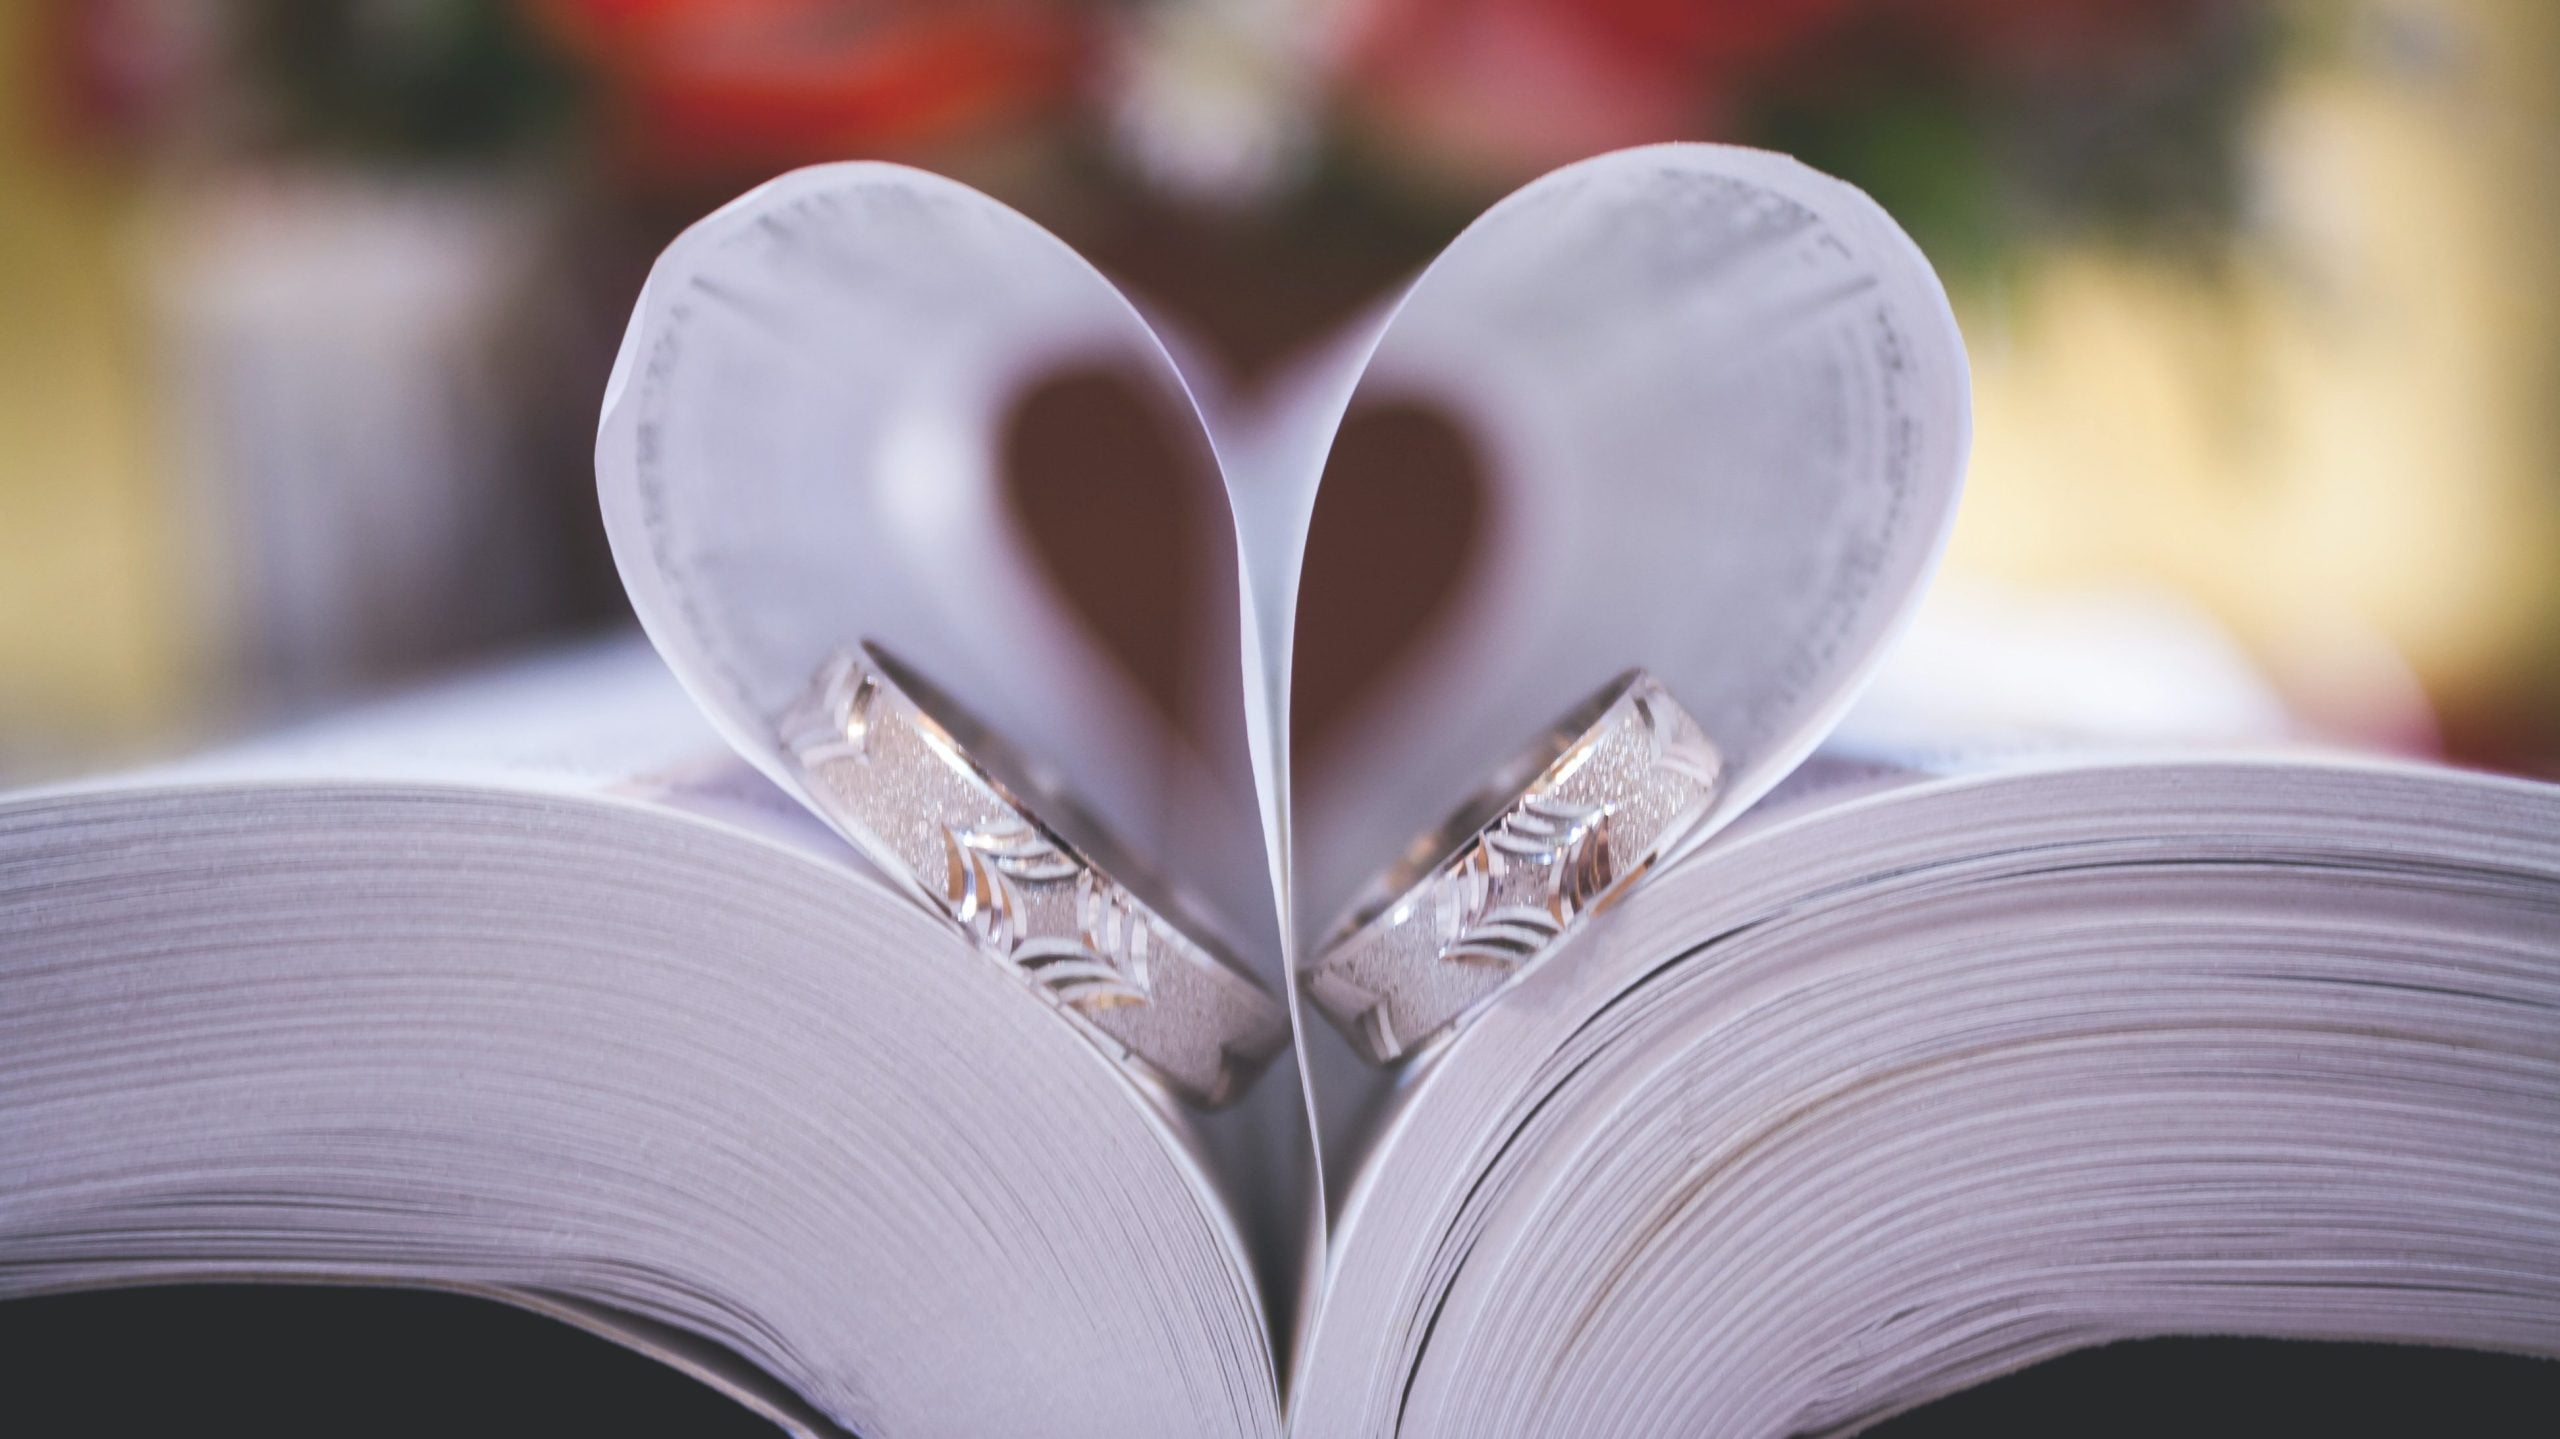 Two wedding rings nestled inside a book where the pages are shaped like a heart